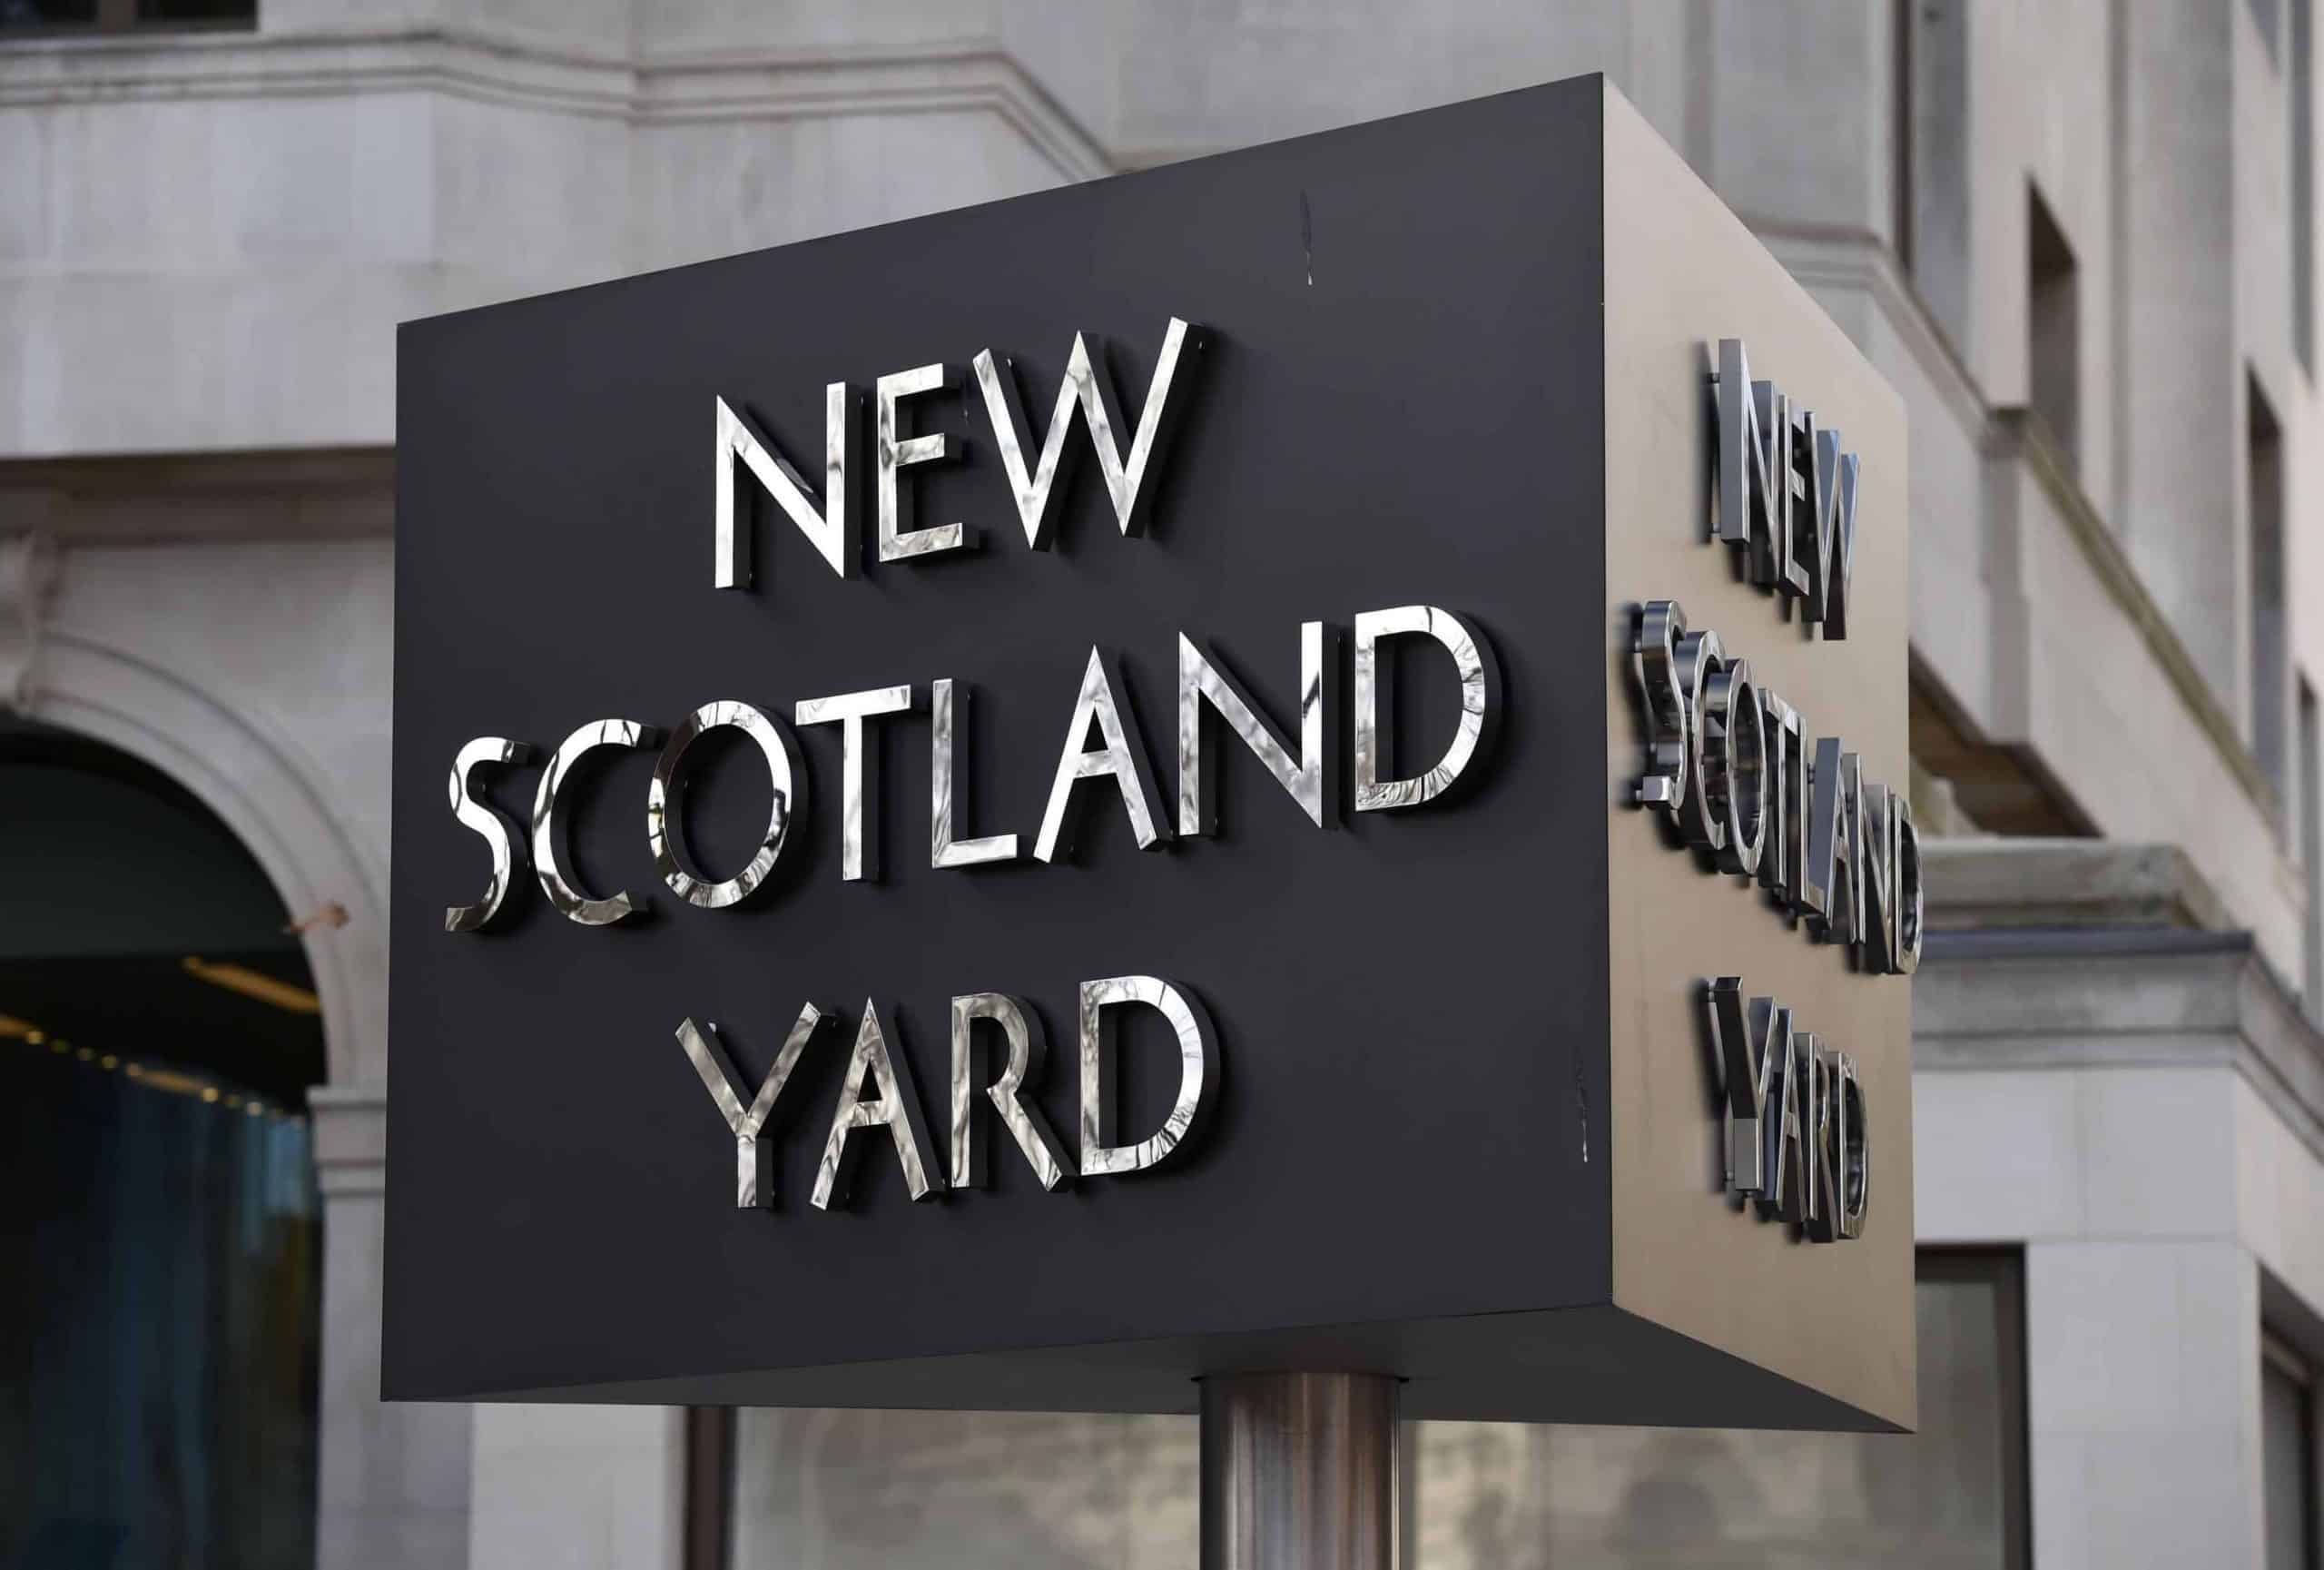 NEW: Serving Met Police officer charged with rape